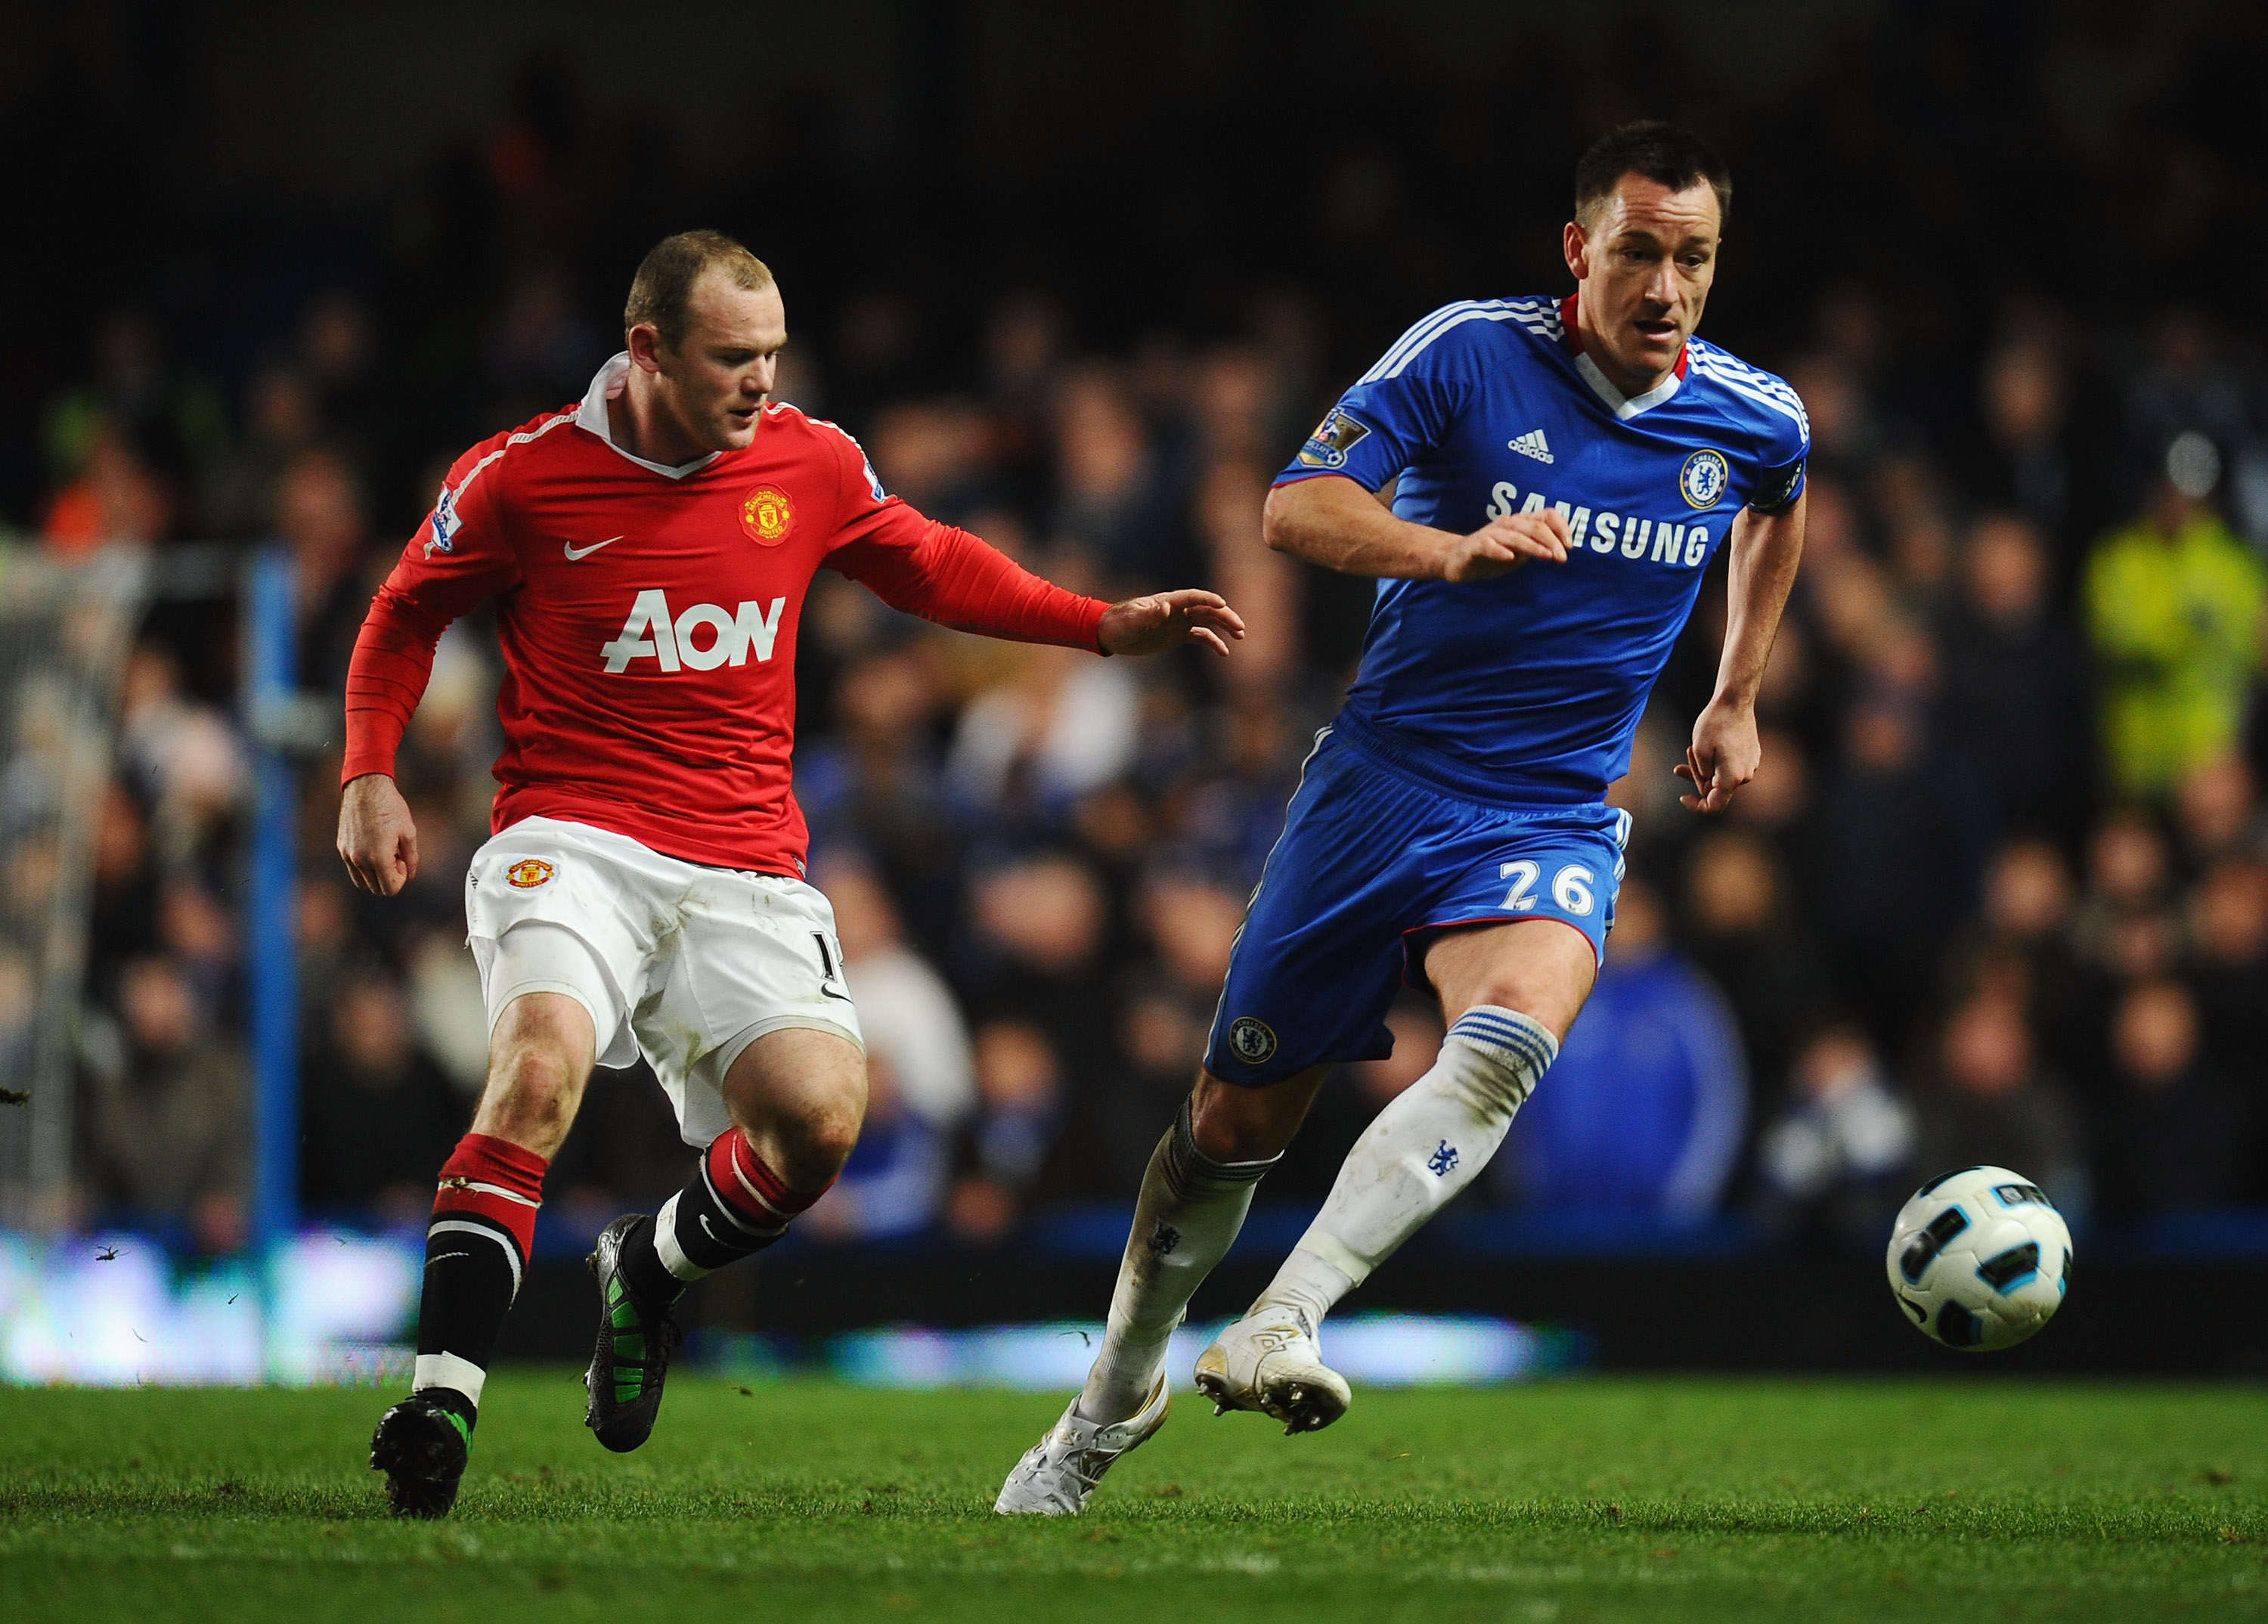 LONDON, ENGLAND - MARCH 01: John Terry of Chelsea is closed down by Wayne Rooney of Manchester United during the Barclays Premier League match between Chelsea and Manchester United at Stamford Bridge on March 1, 2011 in London, England.  (Photo by Clive M